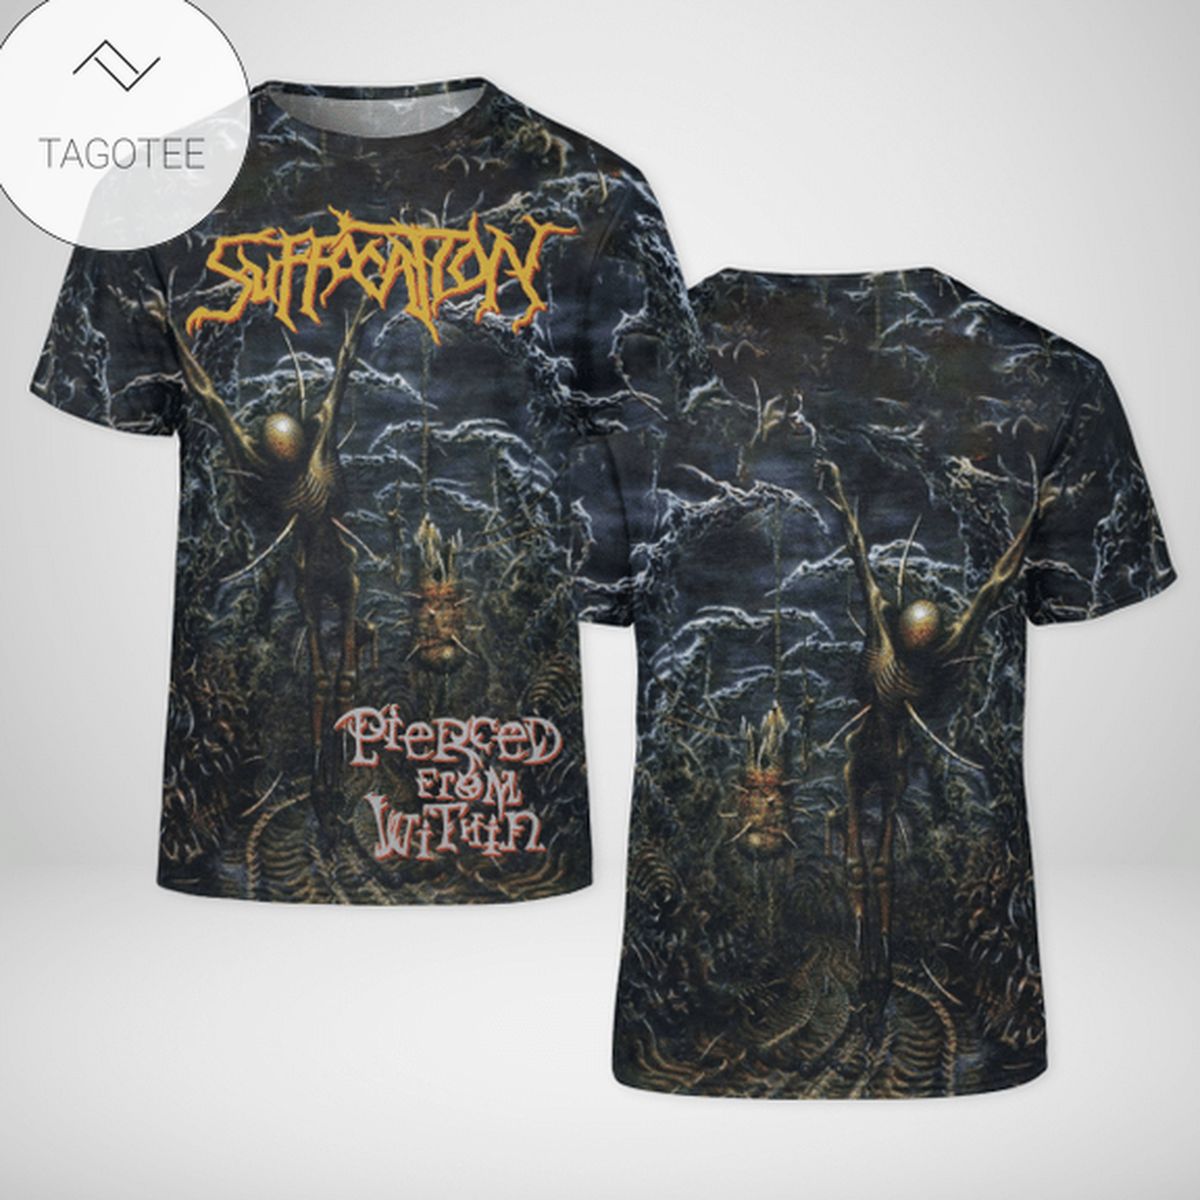 Suffocation Pierced From Within Album Cover Shirt